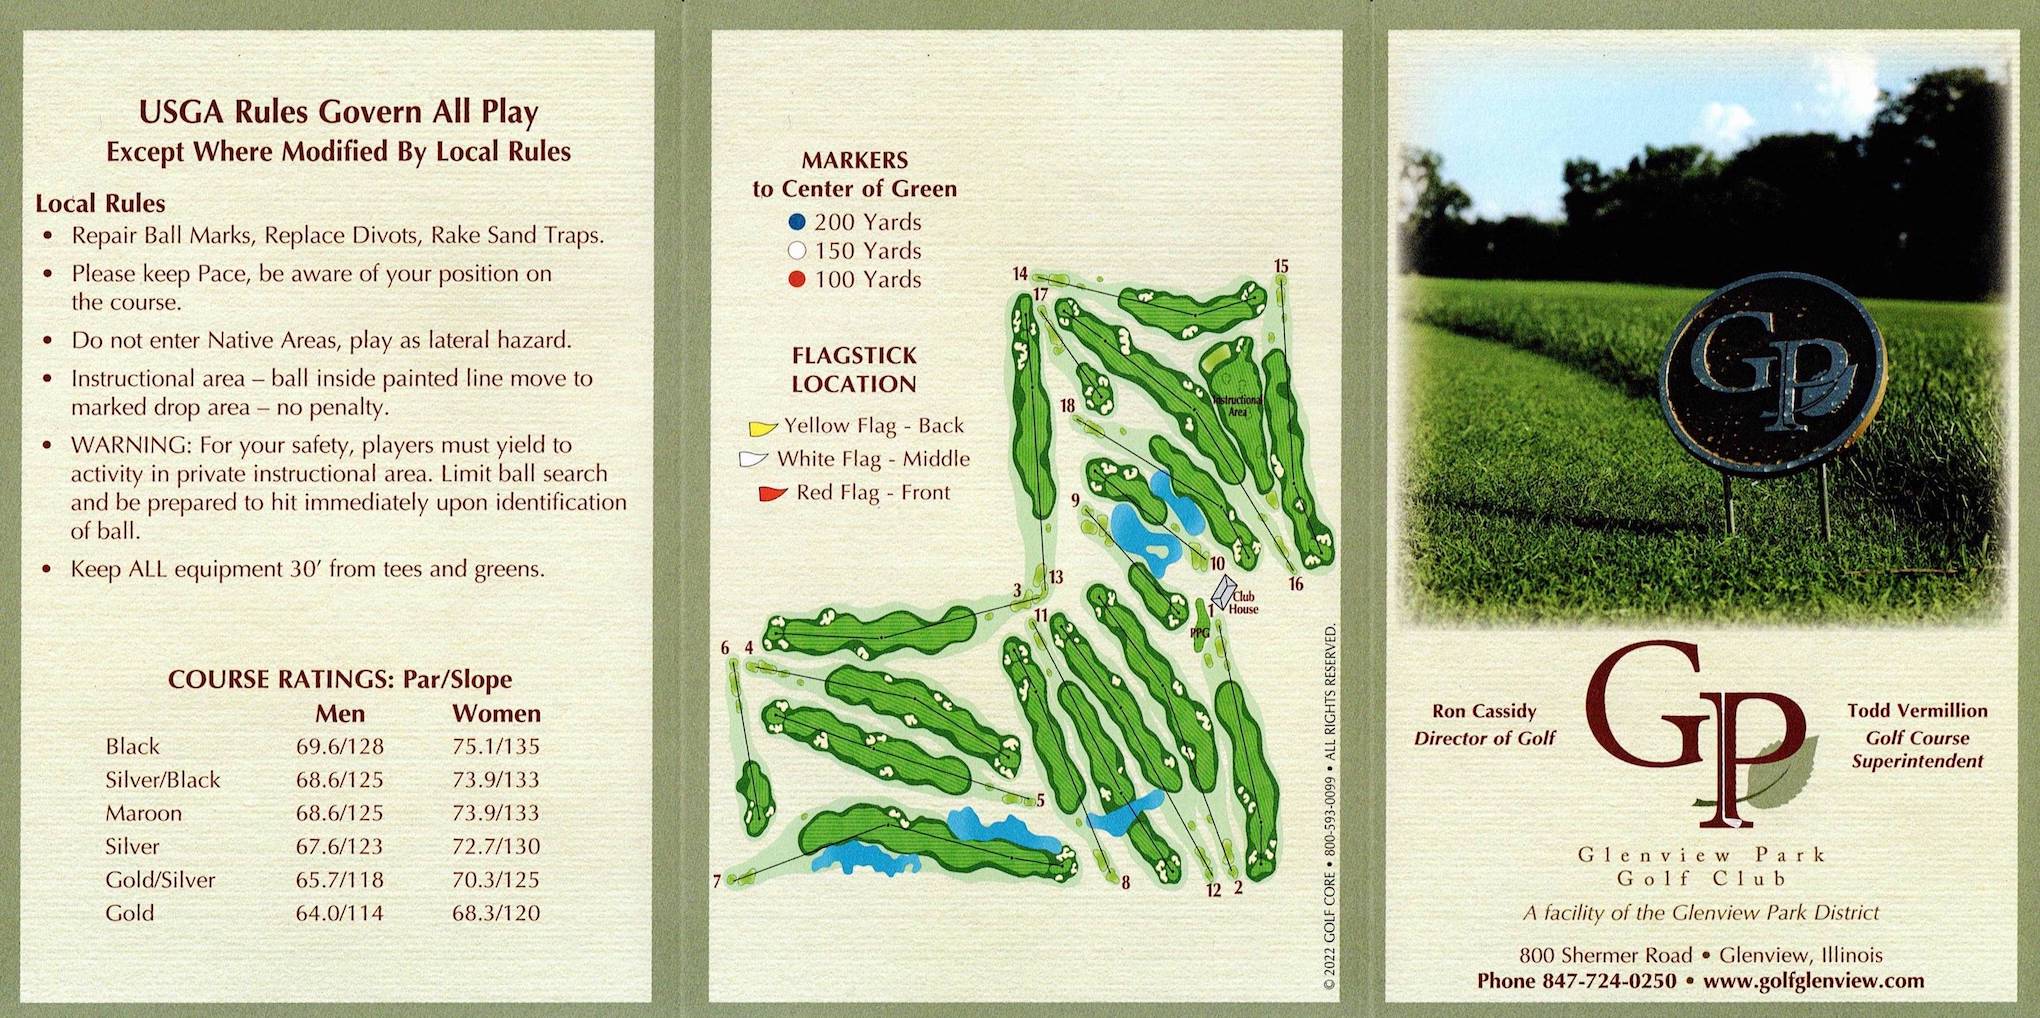 Scan of the scorecard from Glenview Park Golf Club in Glenview, Illinois. 